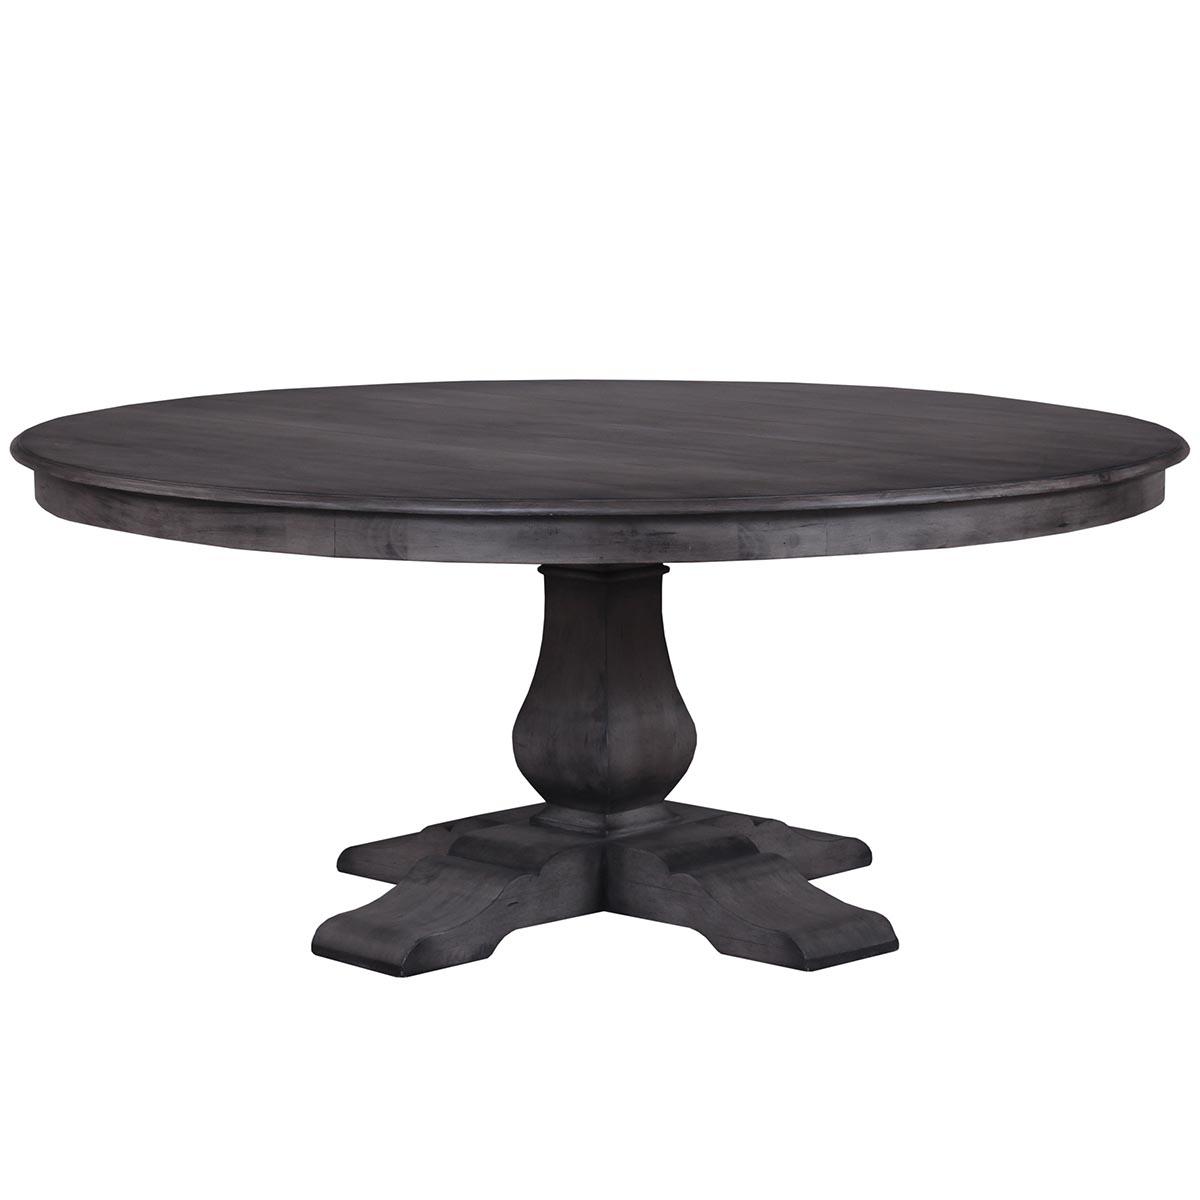 

    
DIOR GREY Trestle 6 Feet Round Dining Table Solid Wood Bramble 26434 Sp Order
